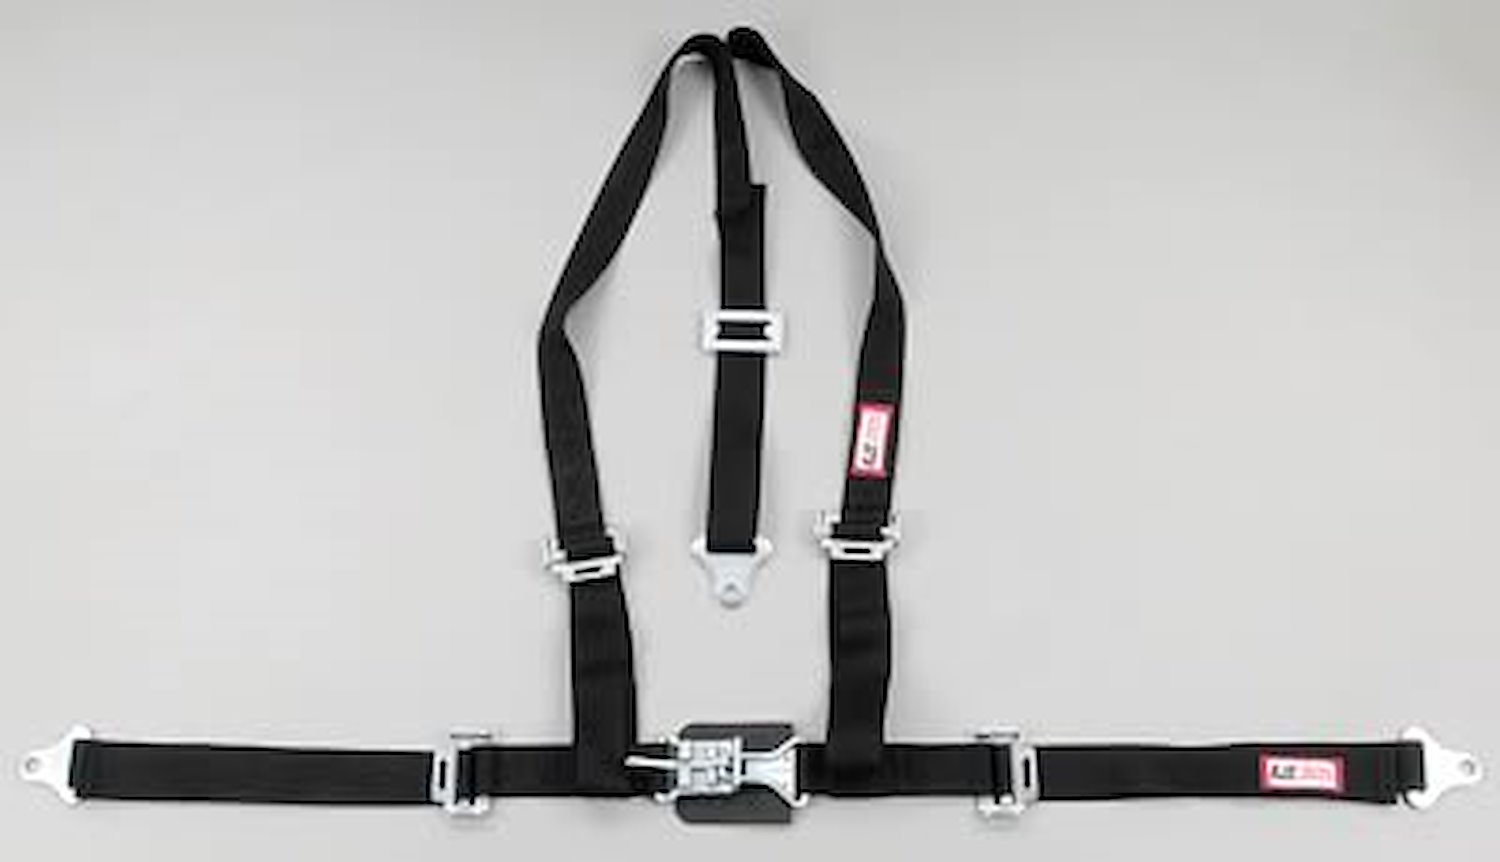 NON-SFI L&L HARNESS 3 PULL DOWN Lap Belt SNAP SEWN IN 2 S.H. Individual ROLL BAR Mount w/STERNUM STRAP WRAP/SNAP GRAY